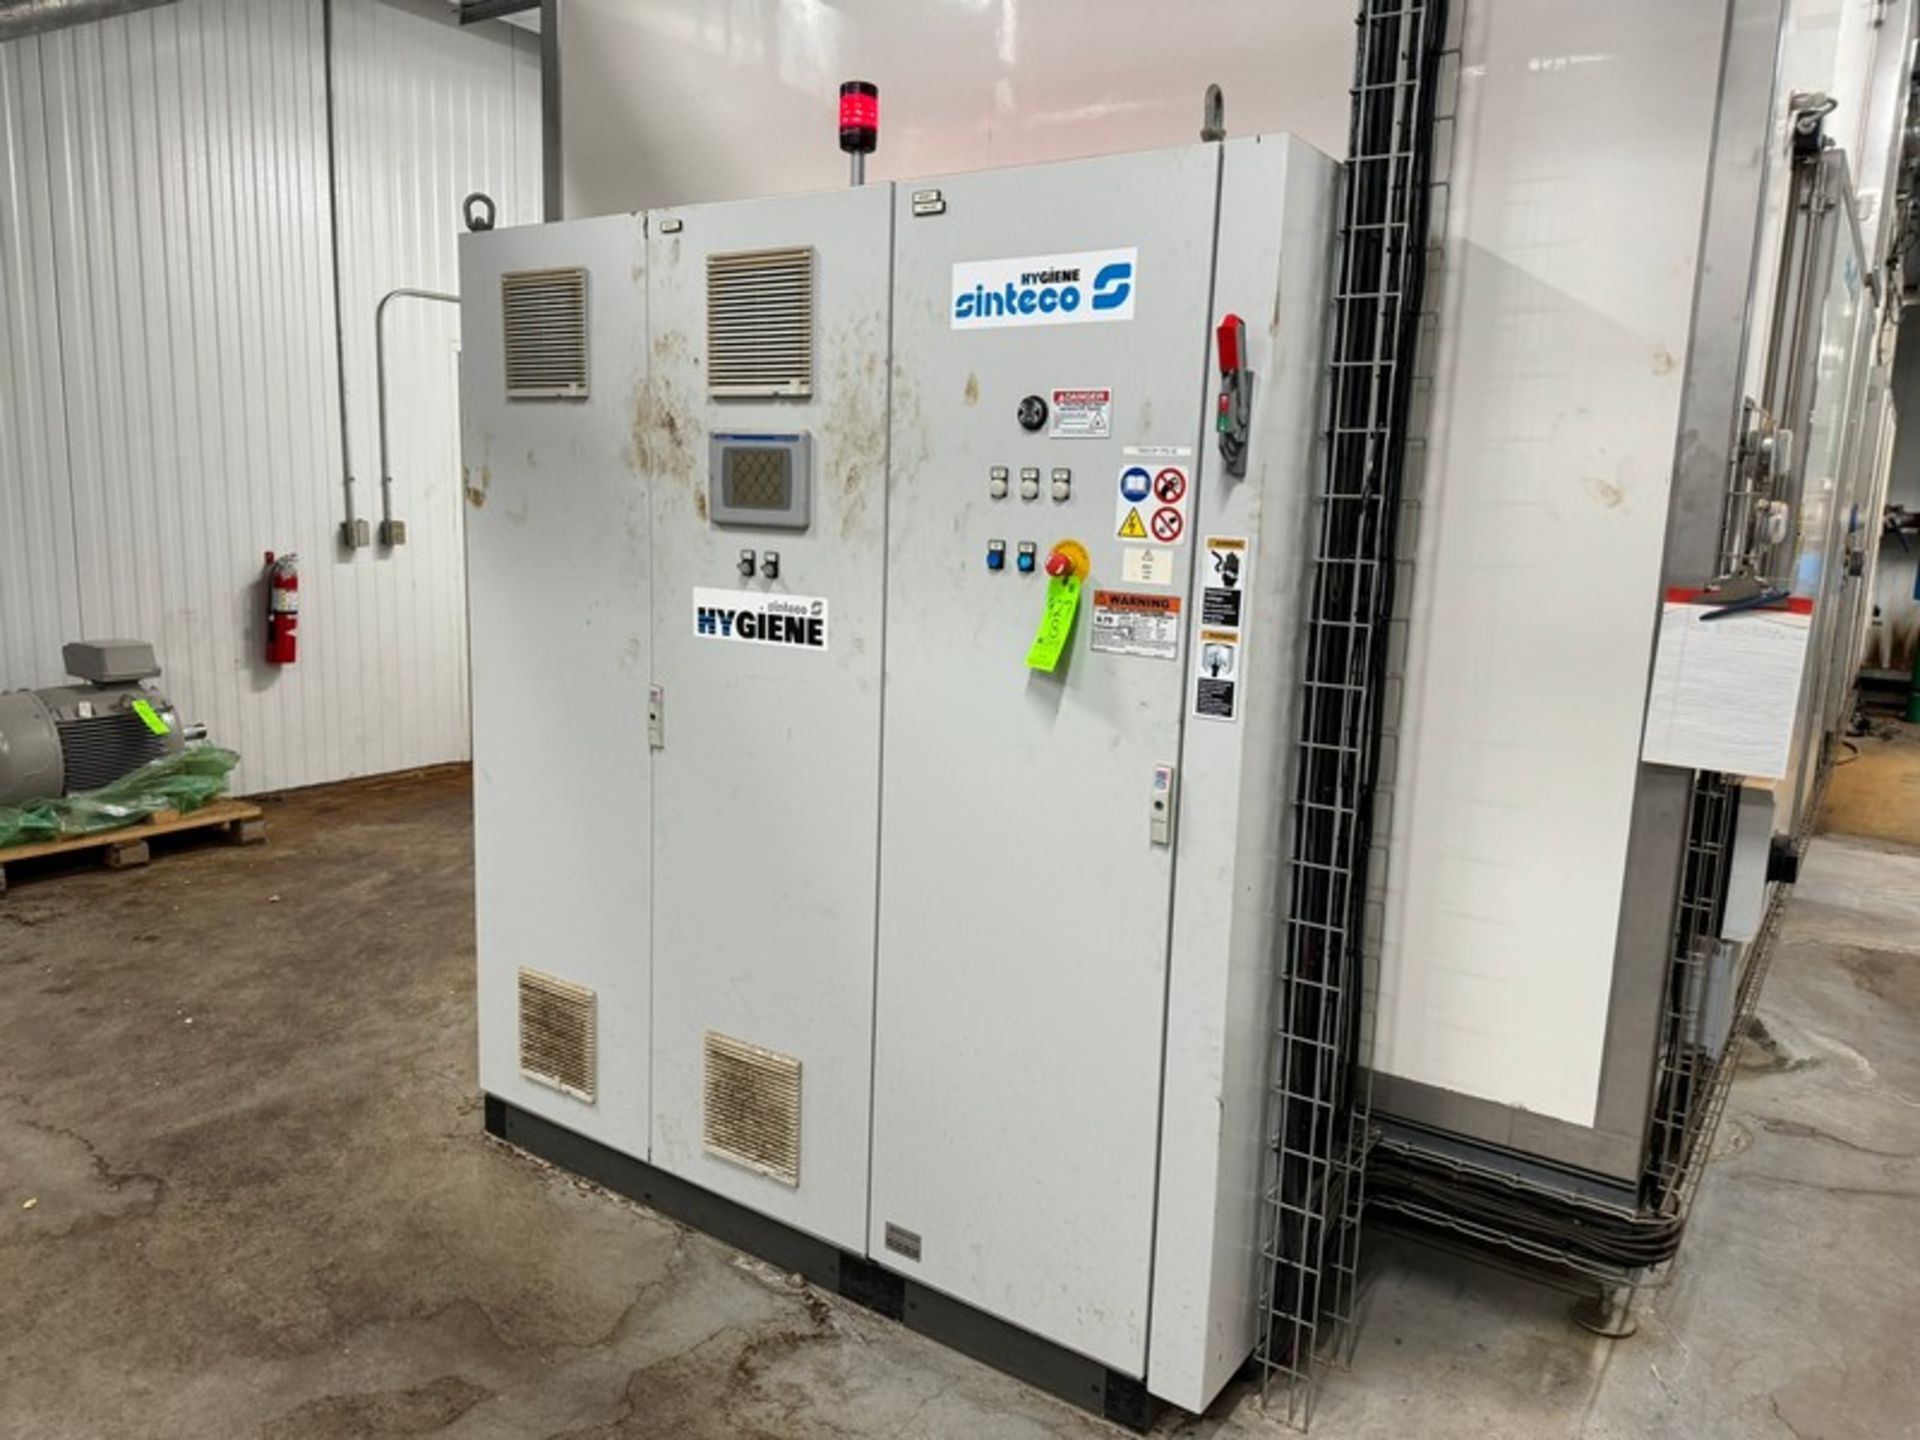 Sinteco Hygiene Air Cleaner, with 3-Door Control Panel (LOCATED IN FREEHOLD, N.J.) - Image 2 of 12